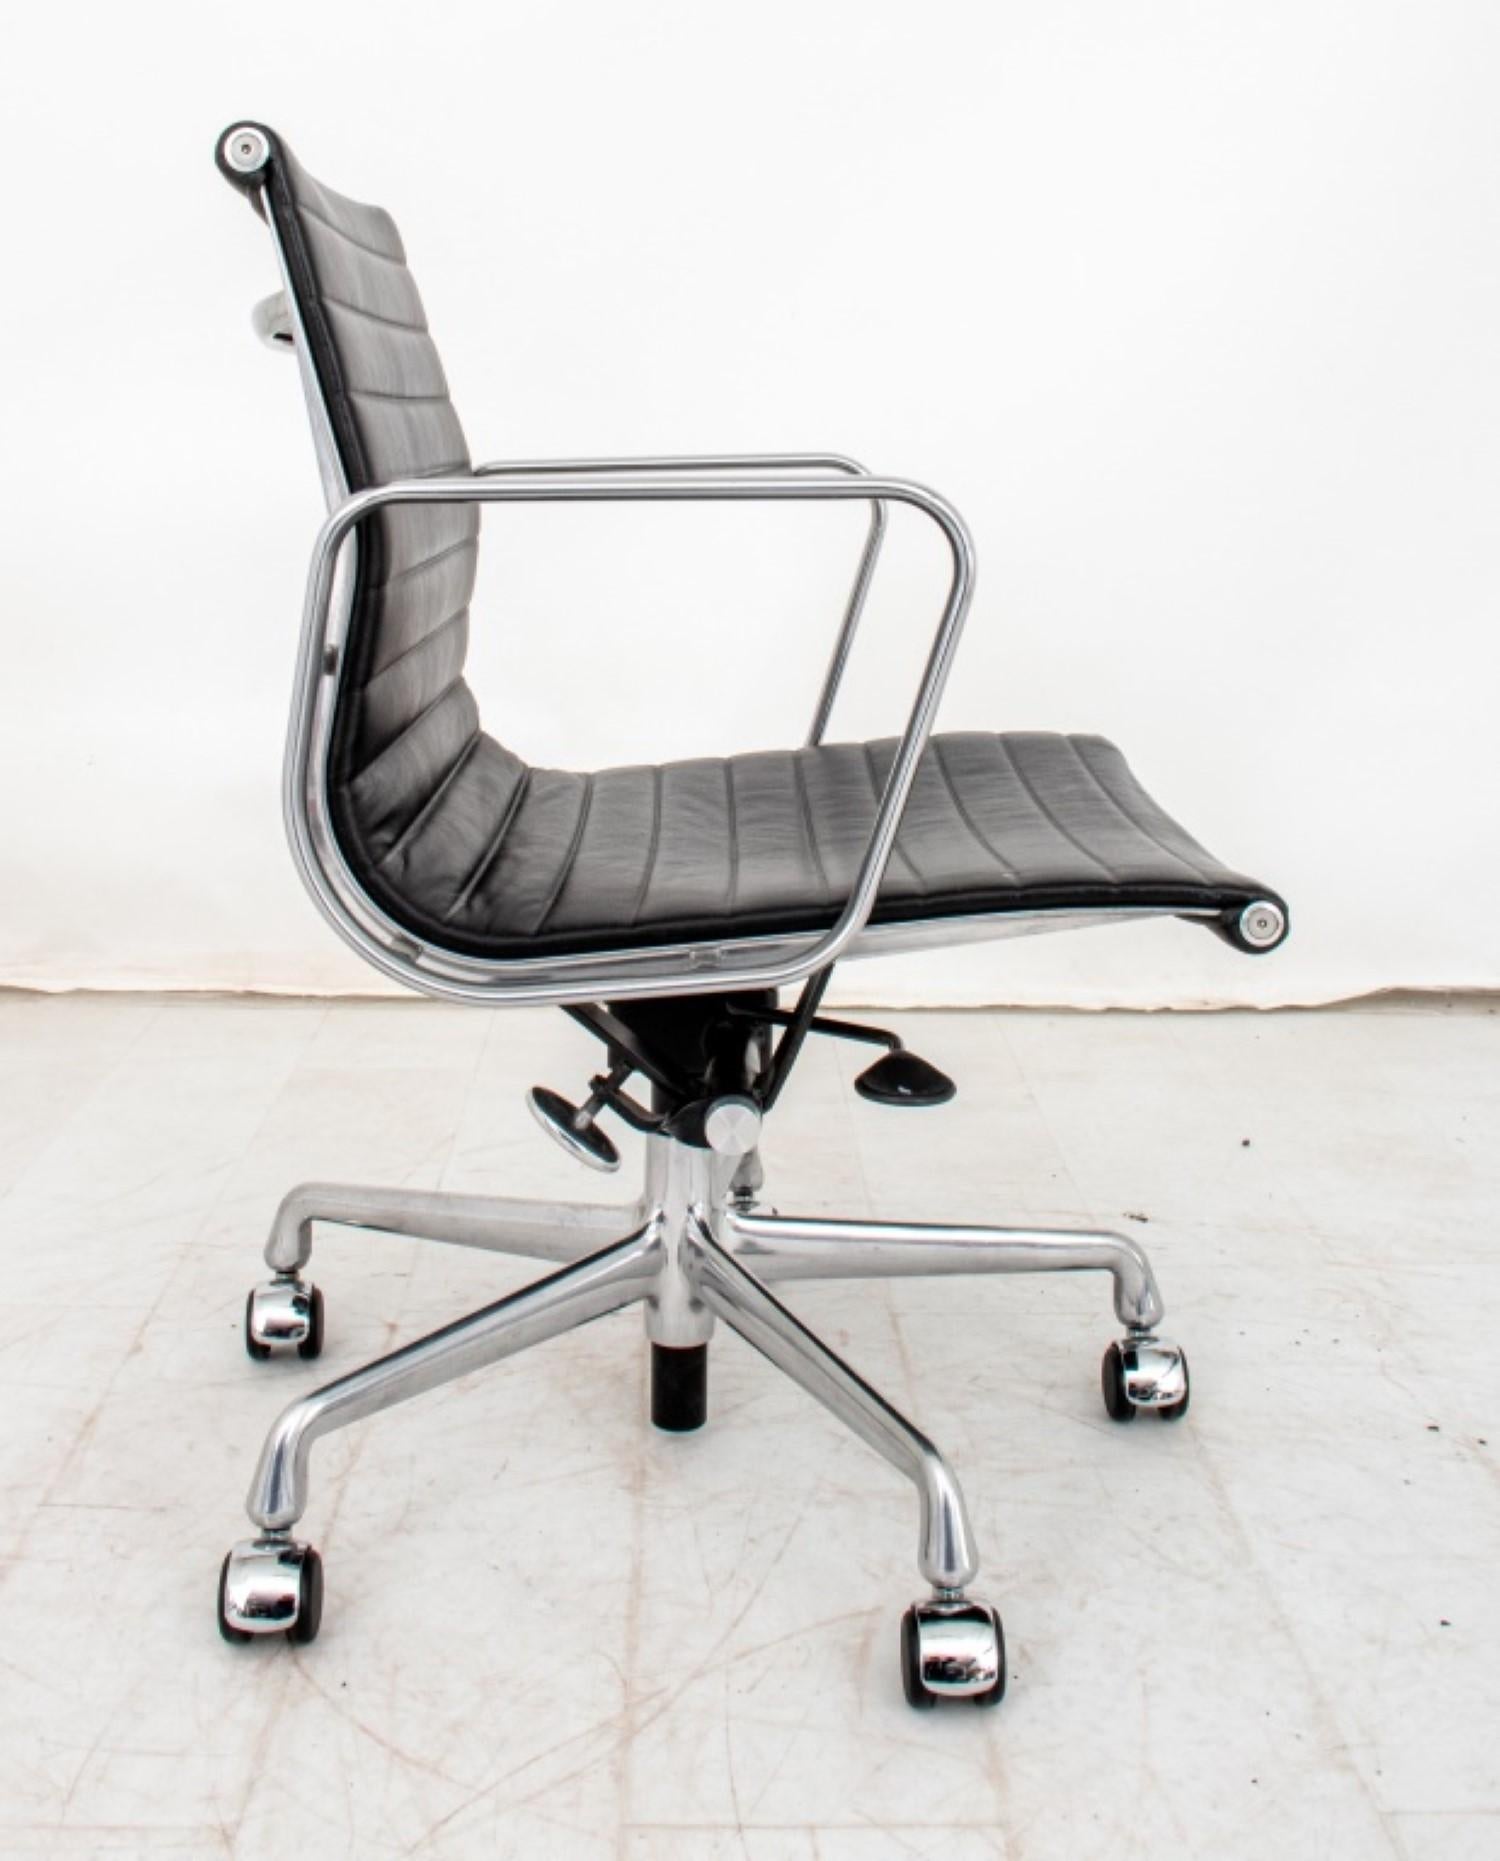 The Charles and Ray Eames for Herman Miller Chrome and Ribbed Vinyl Office Swivel Chair has overall dimensions of approximately 34.25 inches in height, 22.75 inches in width, and 21 inches in depth. This modern office chair is mounted on five